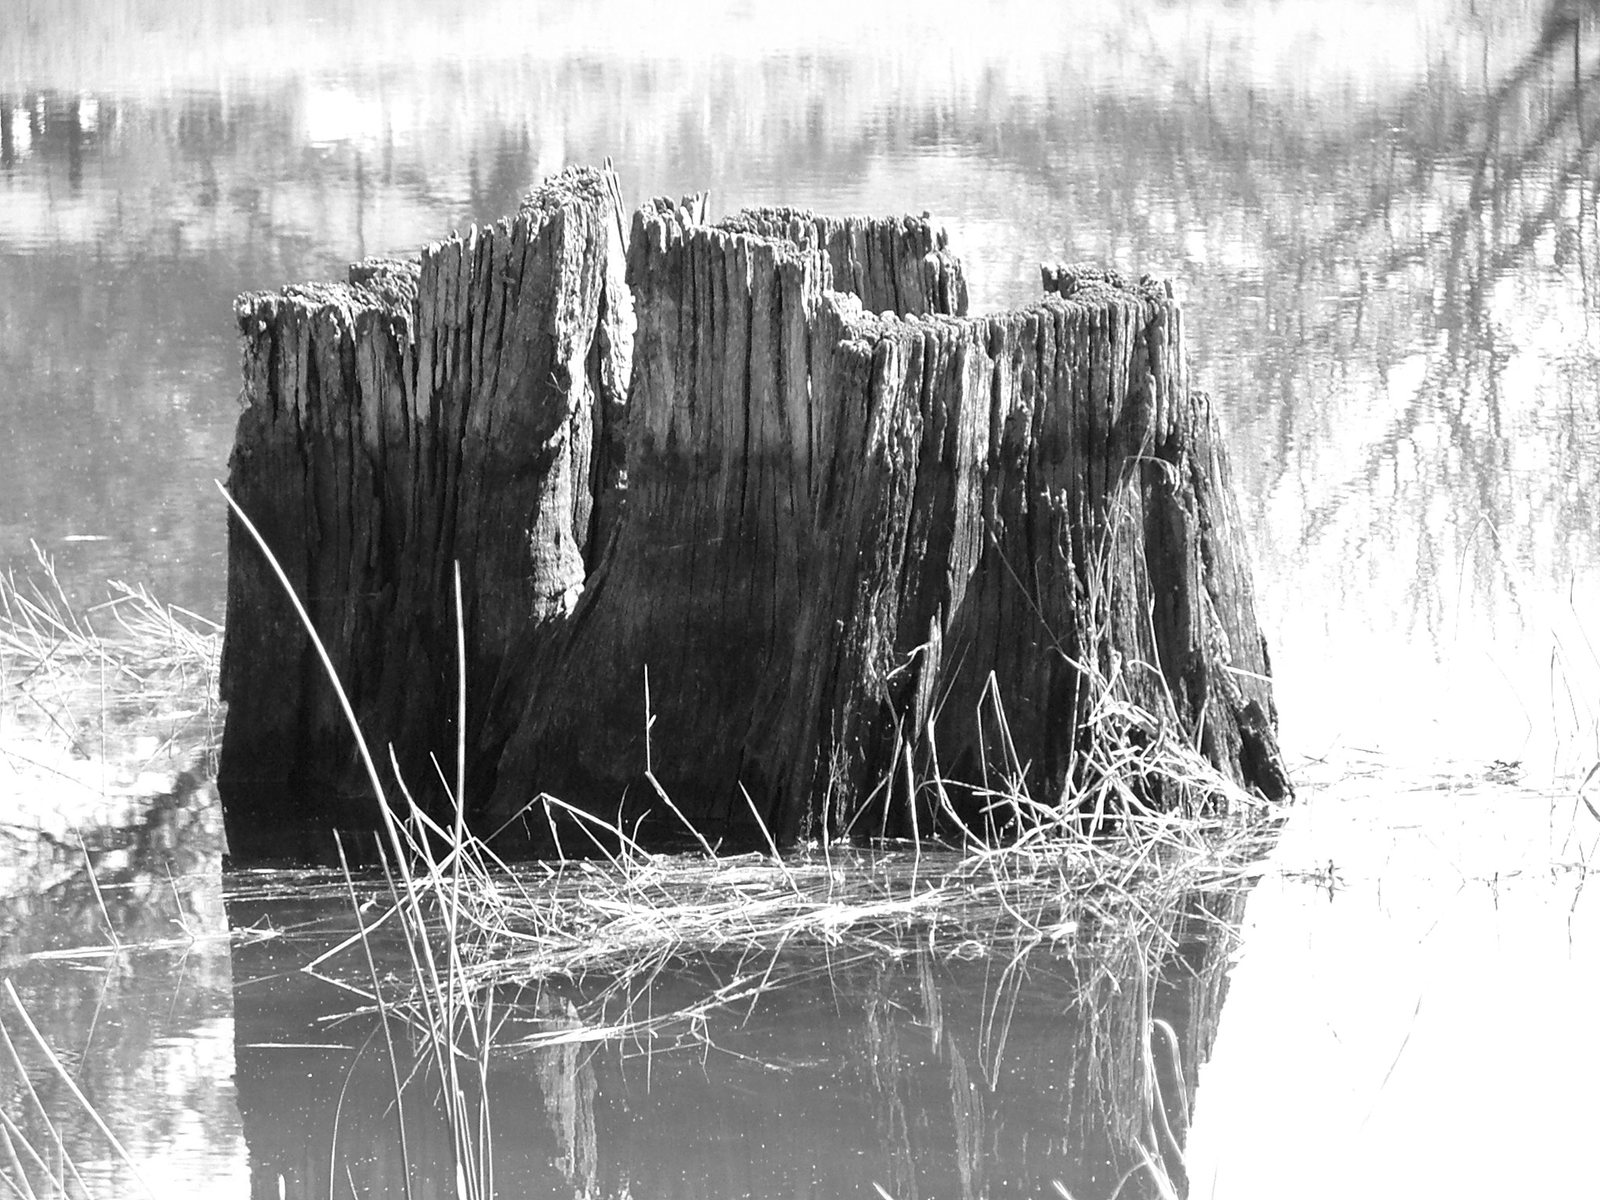 a wooden structure sitting in the middle of a swamp